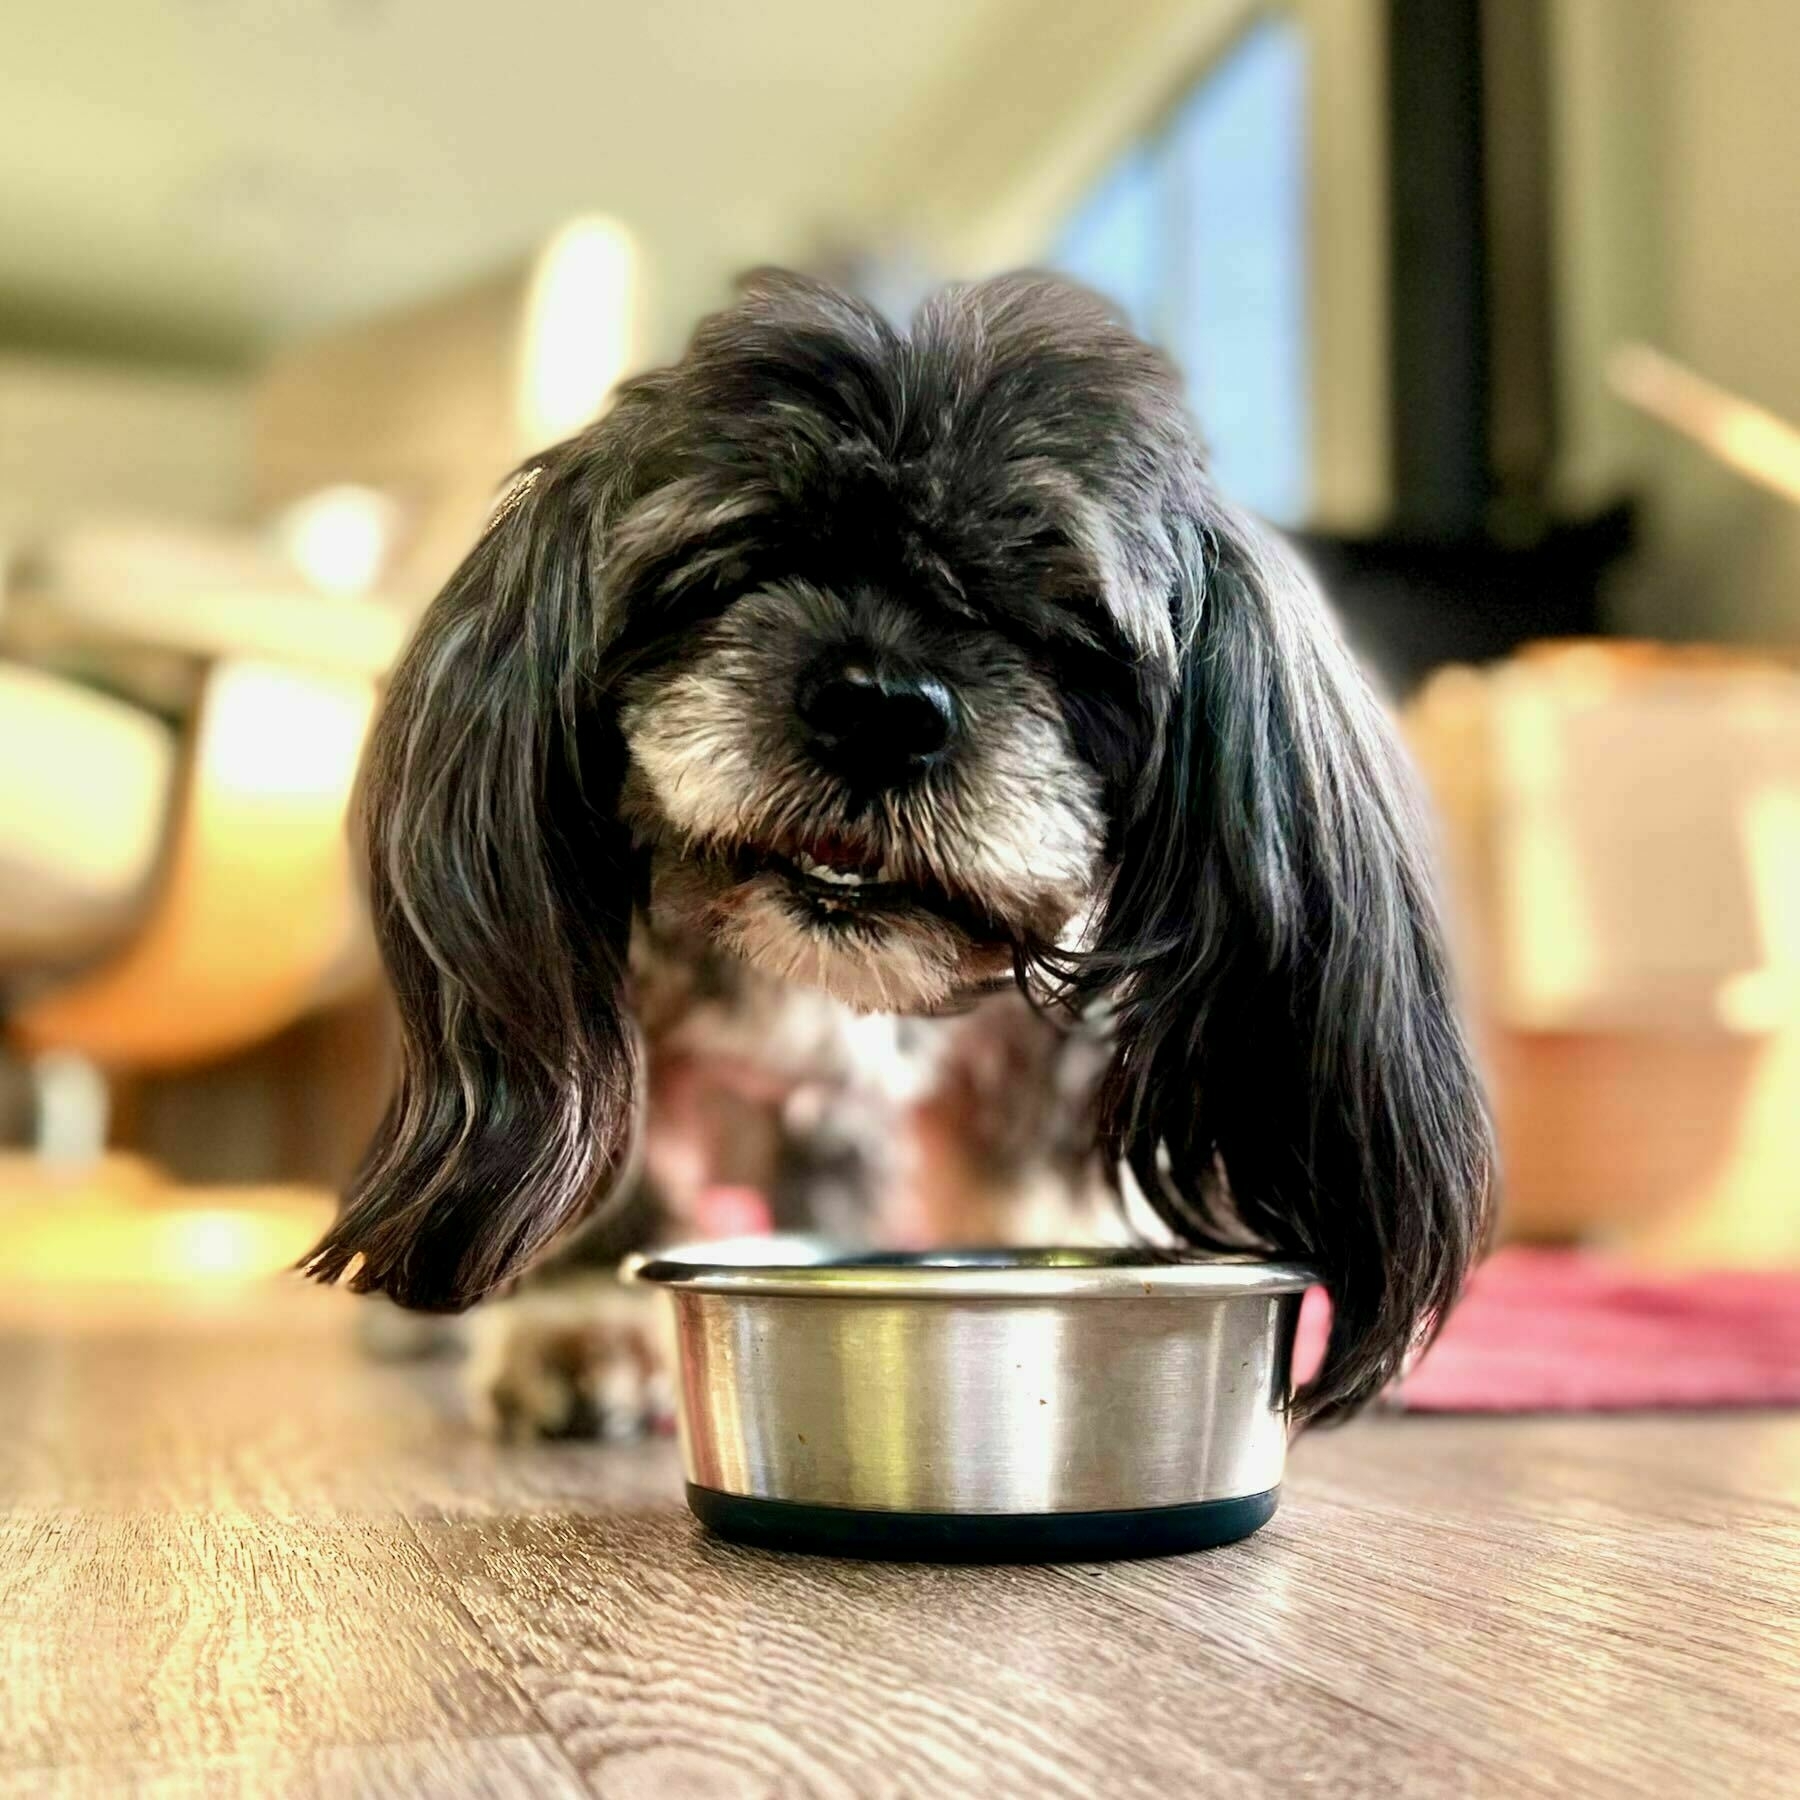 Small black dog crunches biscuits from a bowl on the floor. 